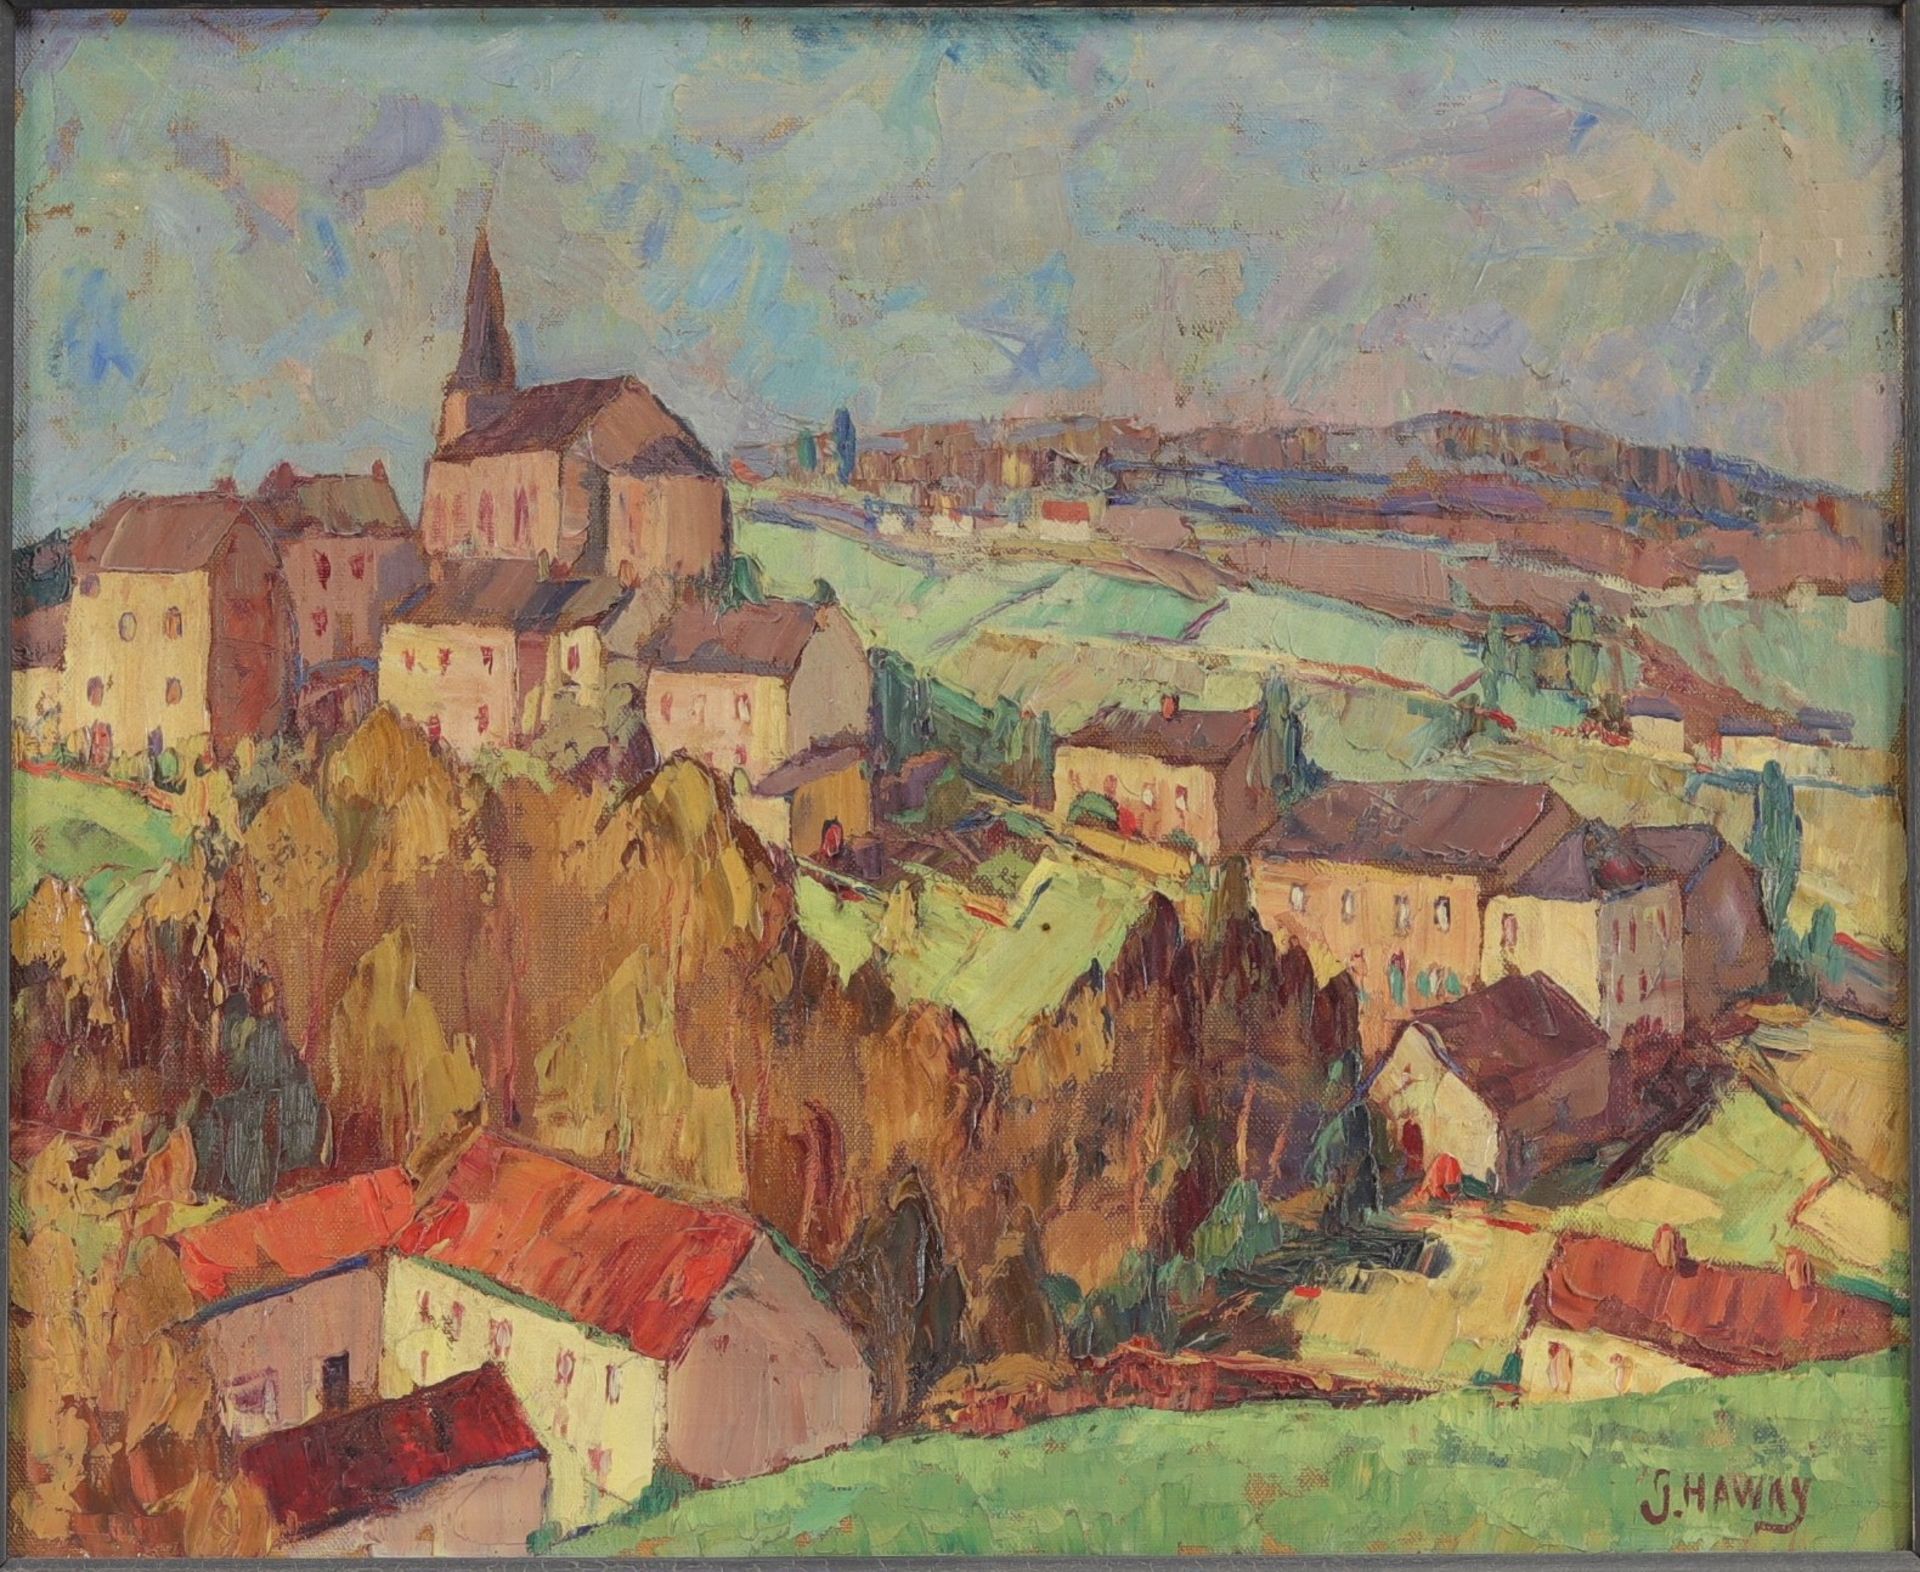 Georges HAWAY (1895-1945) "View of the village Moha" Oil on canvas.